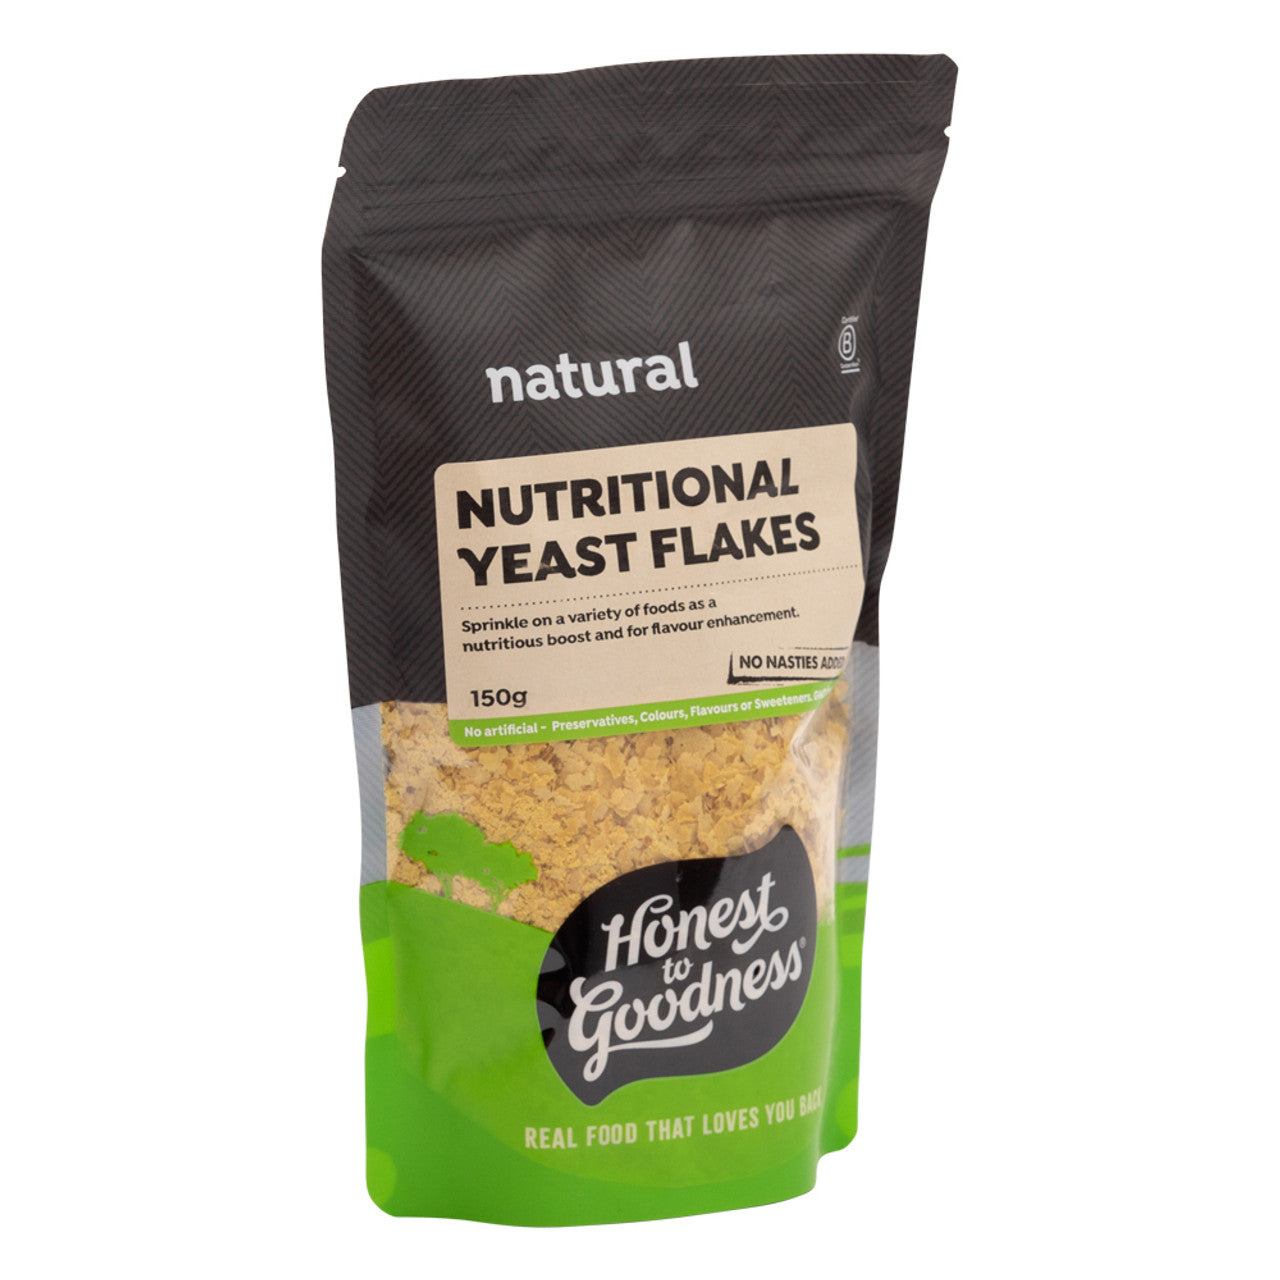 Honest To Goodness Nutritional Yeast Flakes